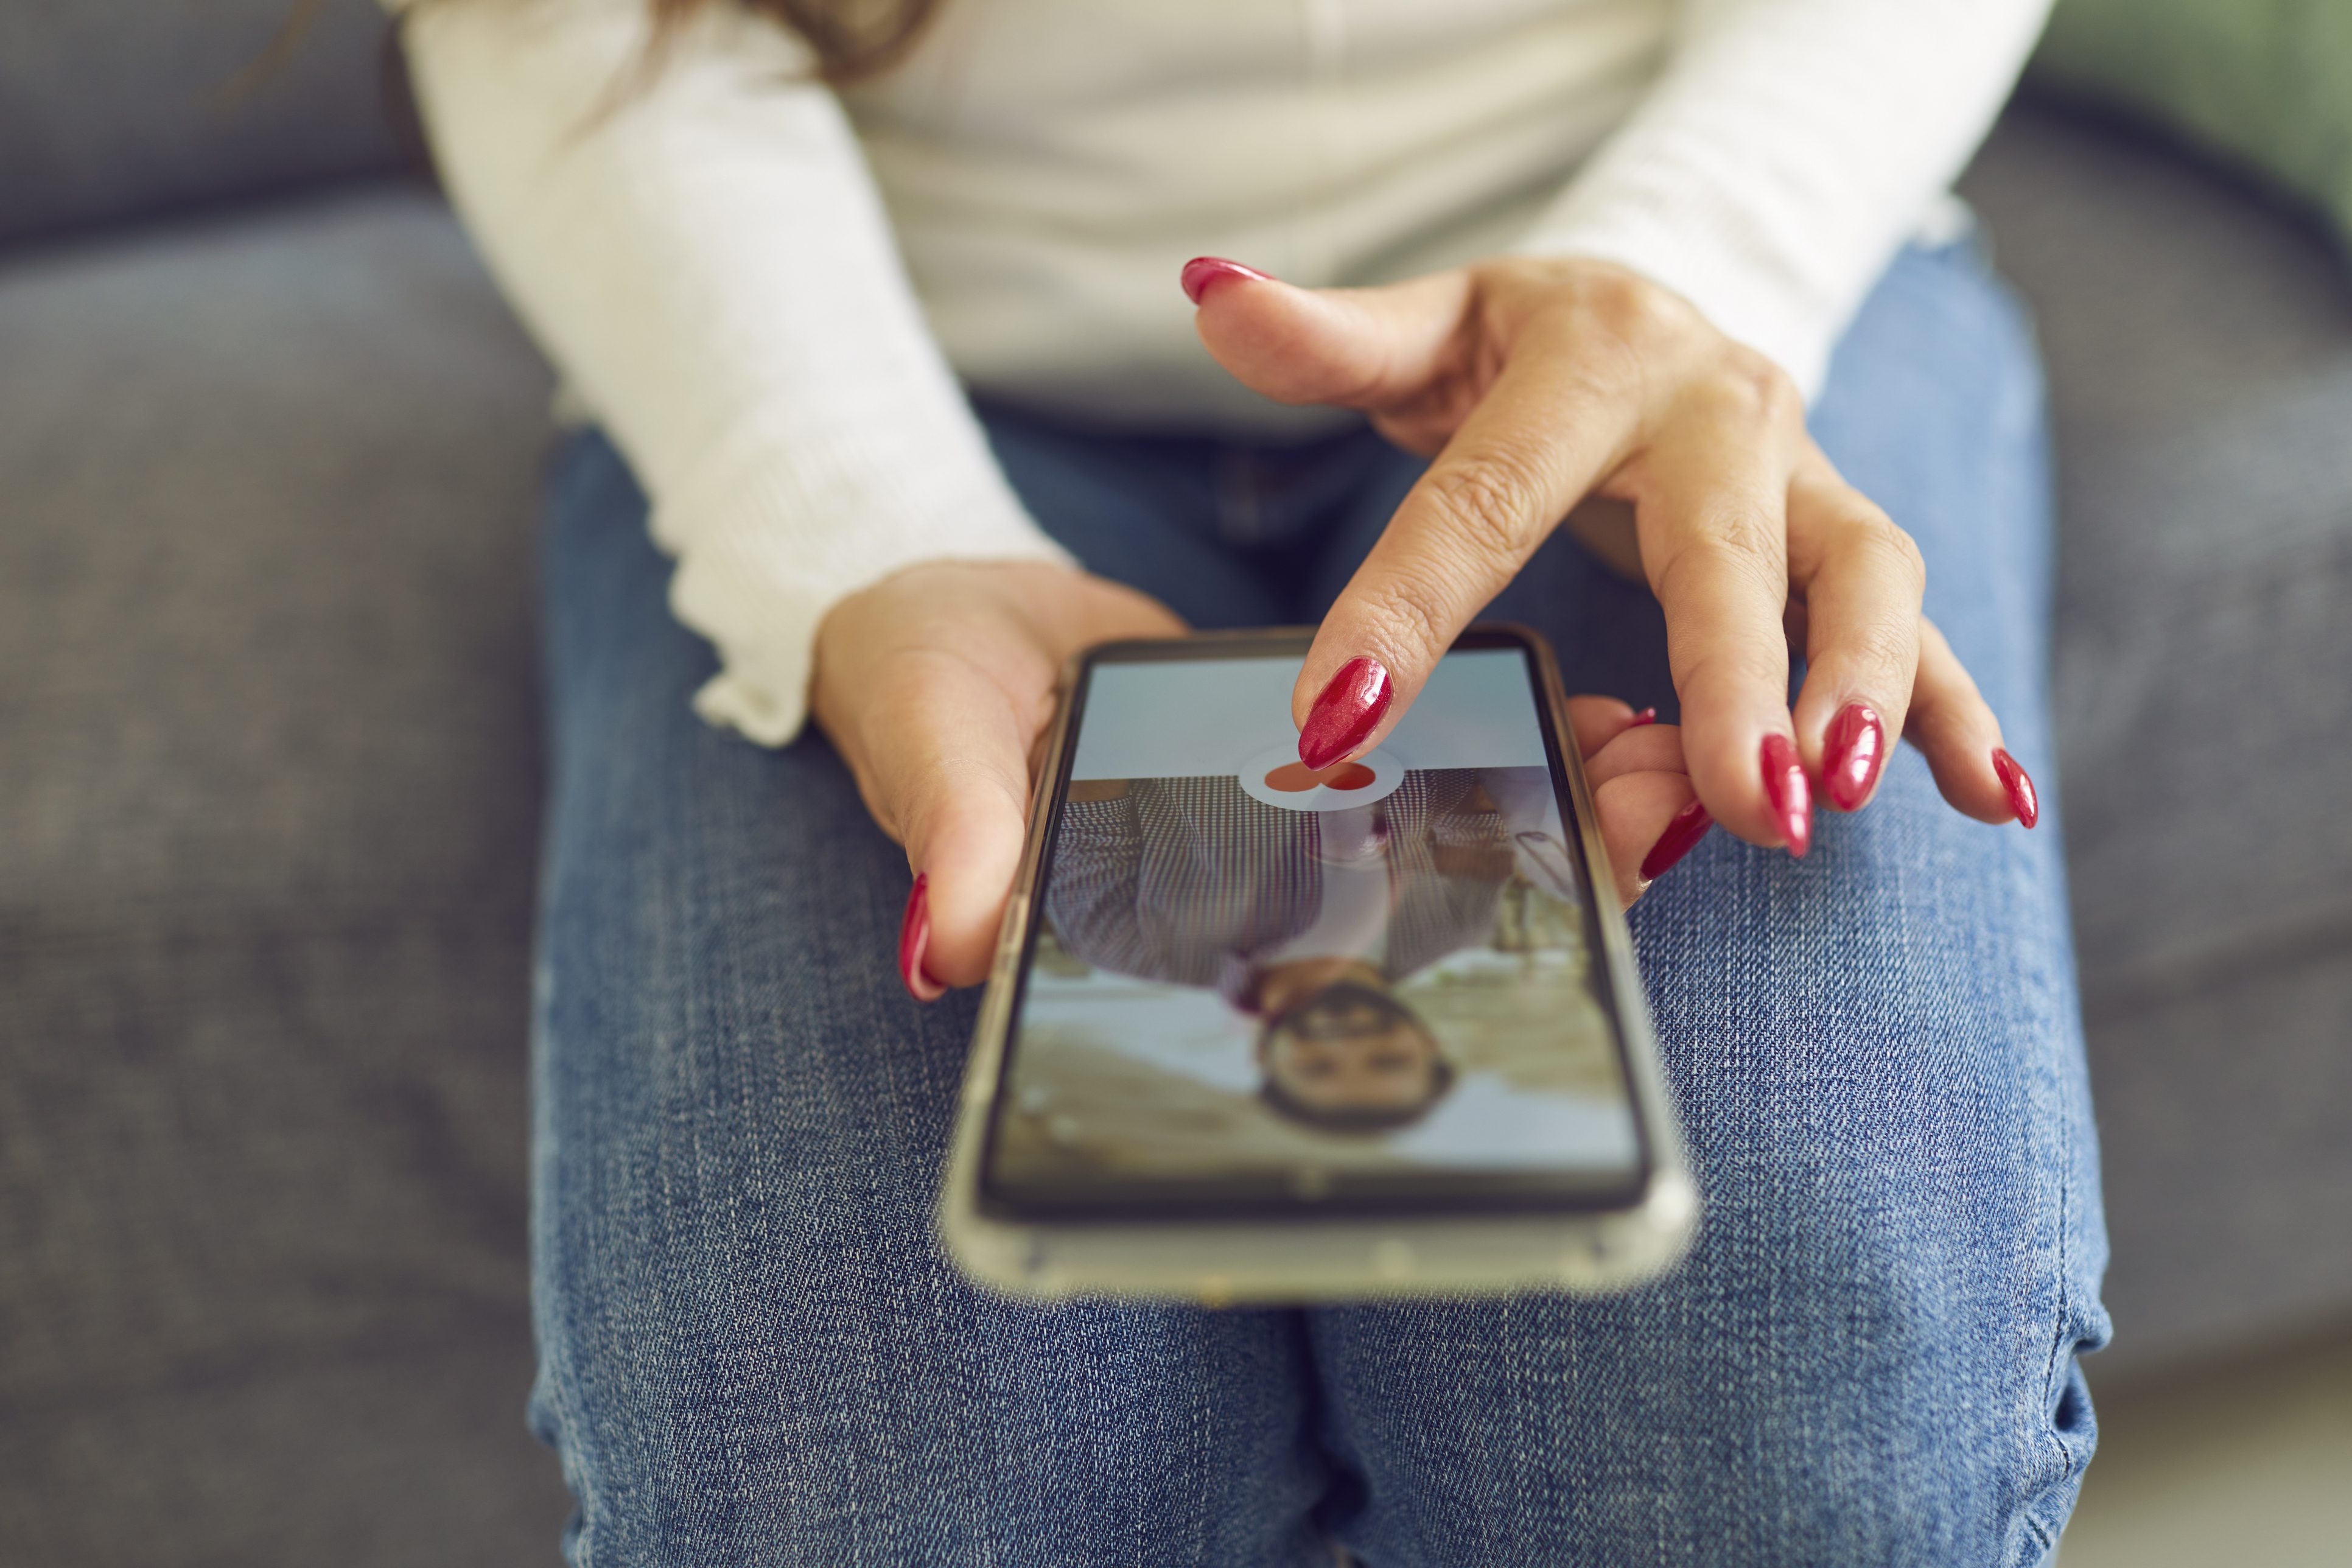 Online Dating: Why Did You Swipe Right On Me?